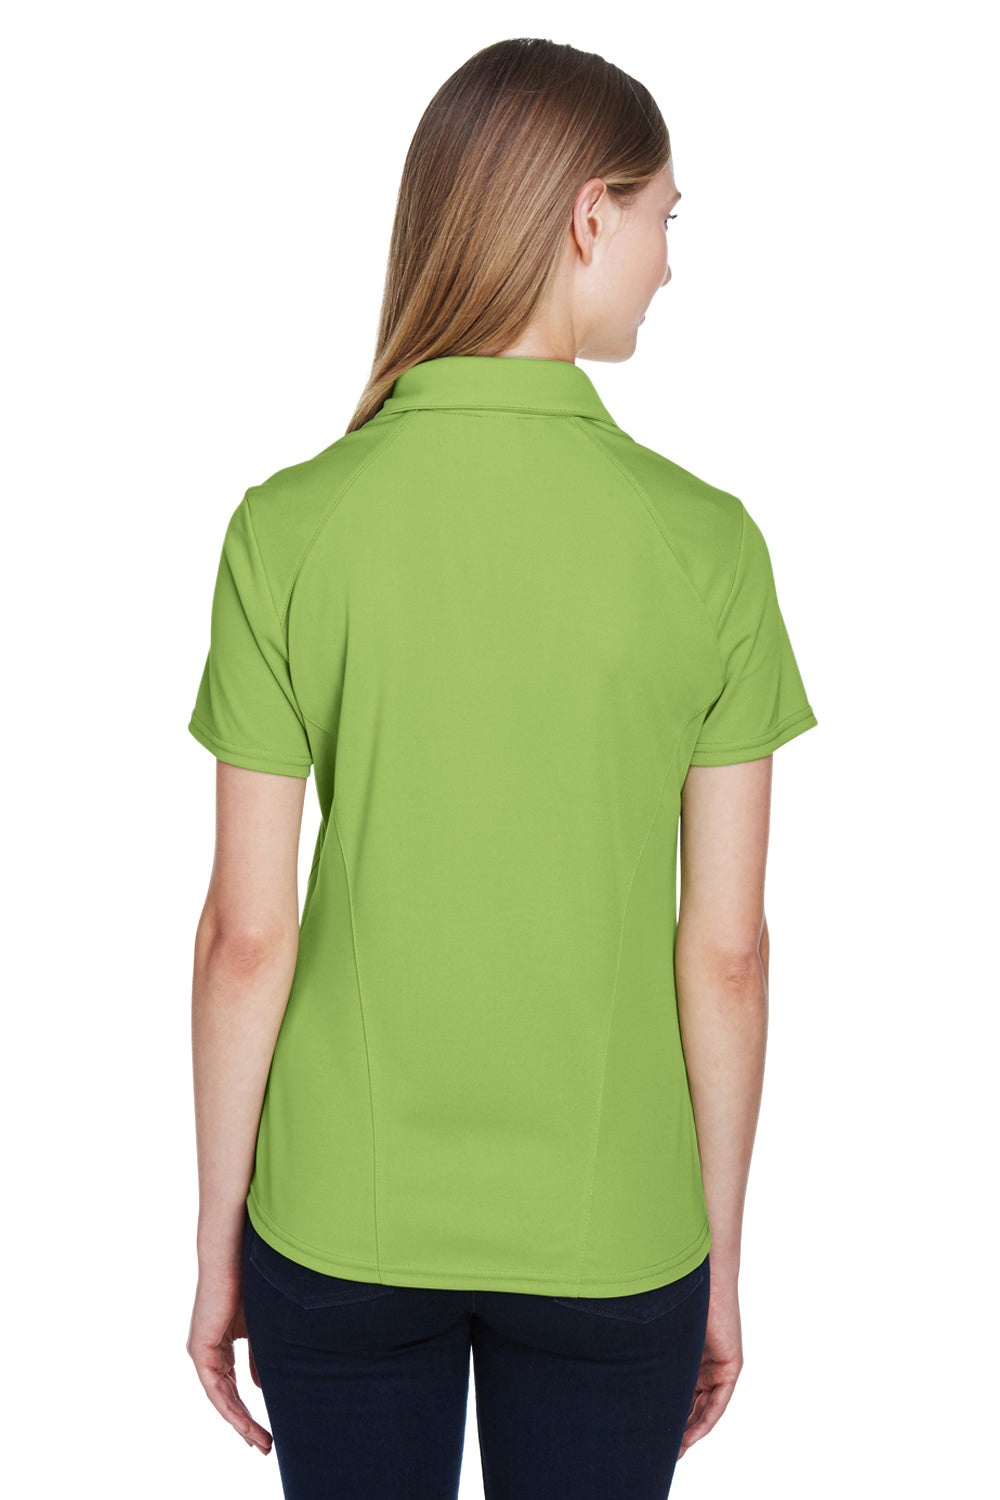 North End 78632 Womens Sport Red Performance Moisture Wicking Short Sleeve Polo Shirt Cactus Green Back